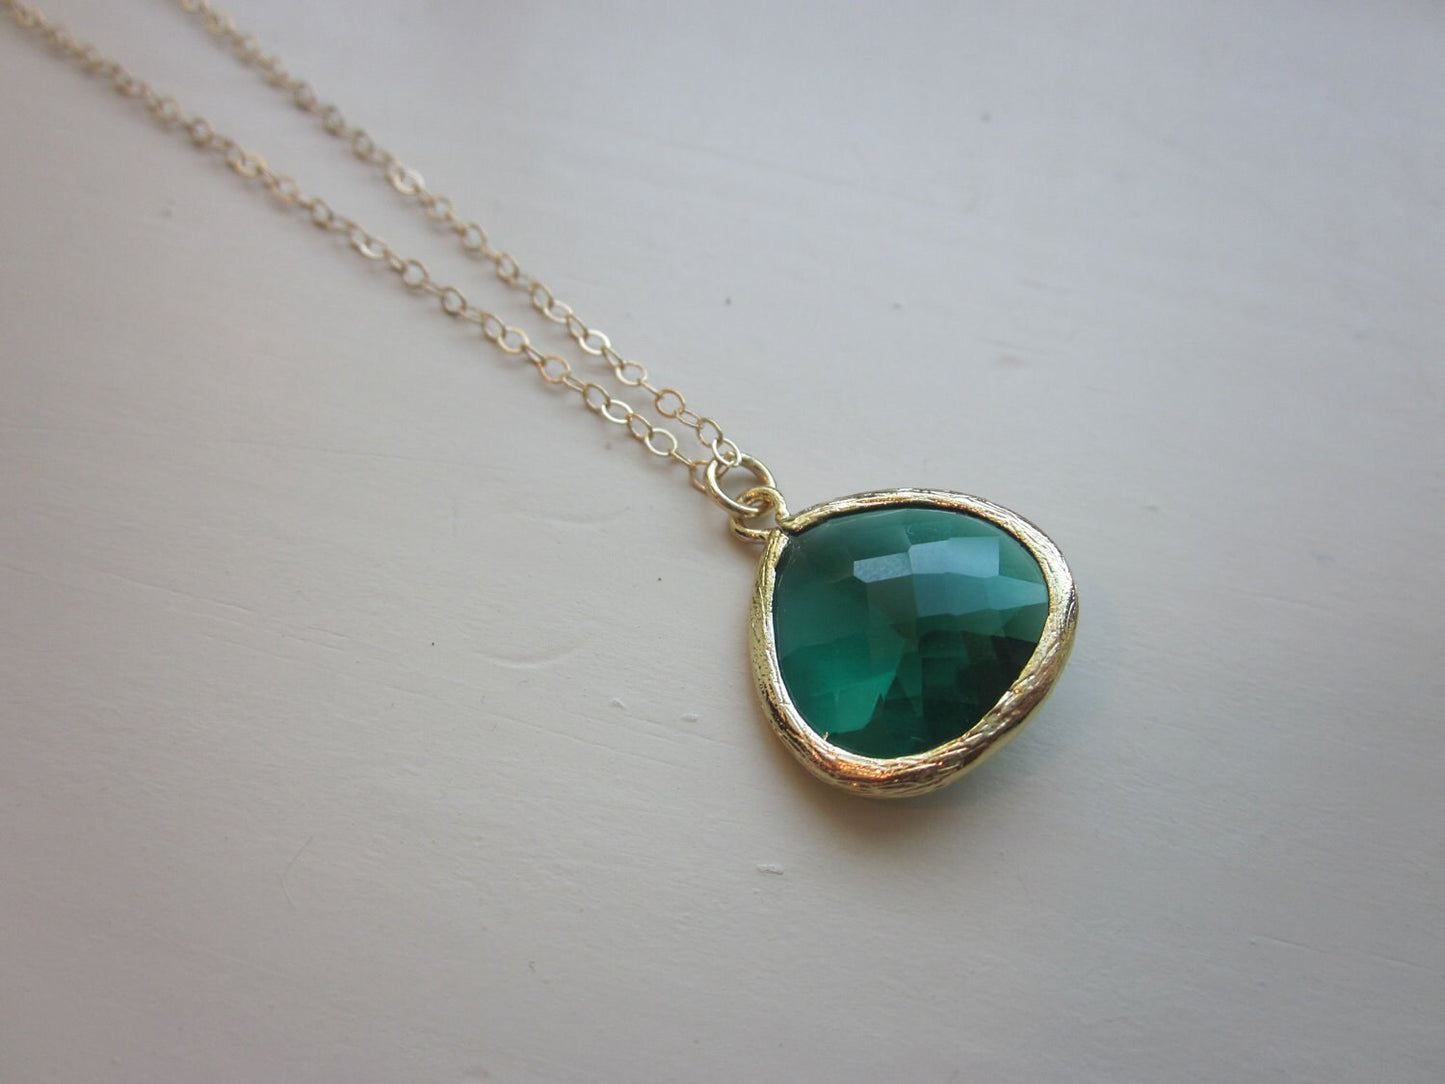 Emerald Green Necklace Gold Plated Large Pendant - Gold Filled Chain - Wedding Jewelry - Bridesmaid Jewelry - Valentines Day Gift